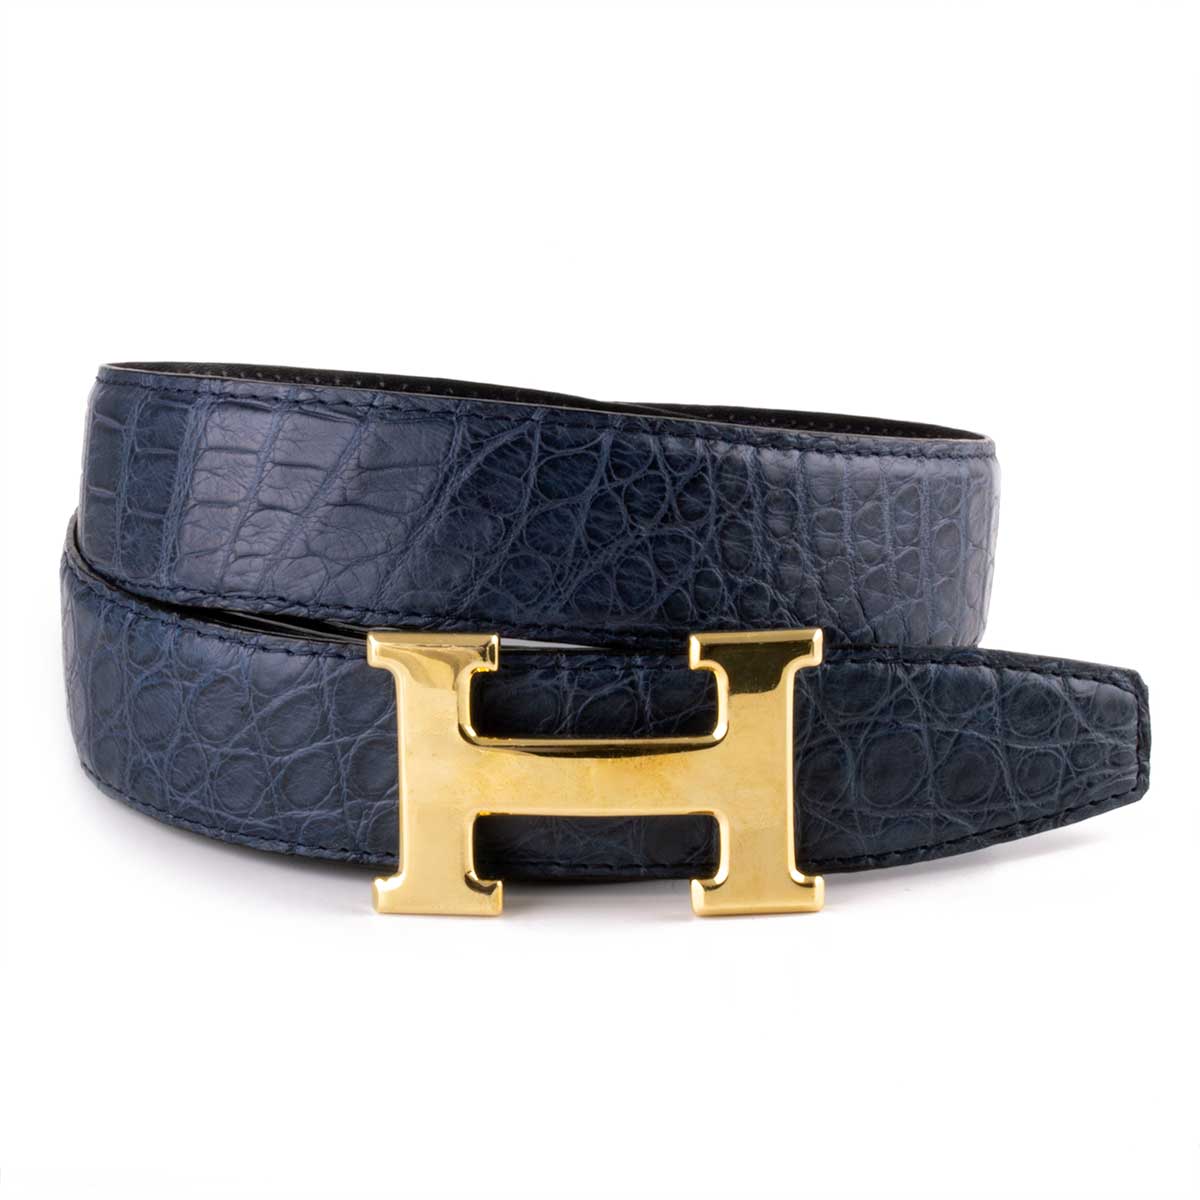 Classic leather belt with polished golden H buckle - Alligator